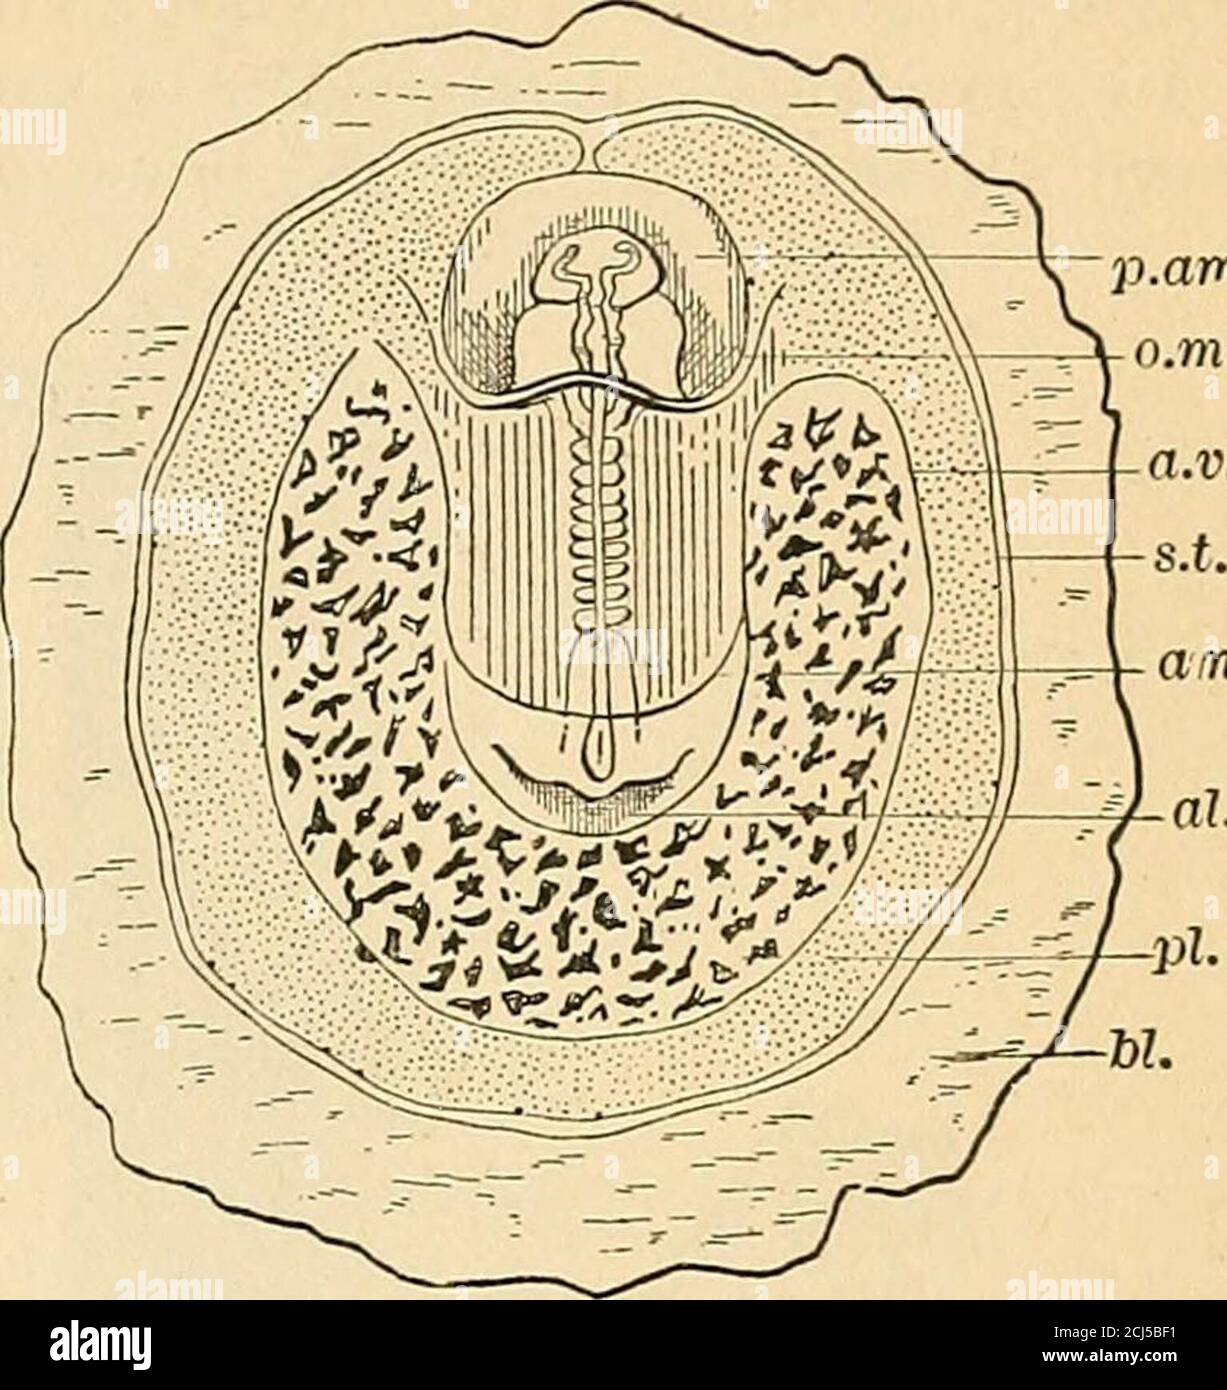 . A text-book of comparative physiology for students and practitioners of comparative (veterinary) medicine . Fig. 79.—Diagrammatic longitudinal sectionoosperm of rabbit at an advanced stage of preg-nancy (KOlliker, after Bischoff). a, amnion; al,allantois with its blood-vessels; e, embryo ; ds,yelk-sac ; ed, ed, ed, hypoblastic epithelium ofthe yelk-sac and its stalk (umbilical vesicle andcord); fd, vascular mesoblastic membrane of theumbilical cord and vesicle ; pi, placental villiformed by the allantois and subzonal membrane;r, space filled with fluid between the amnion,the allantois. and t Stock Photo